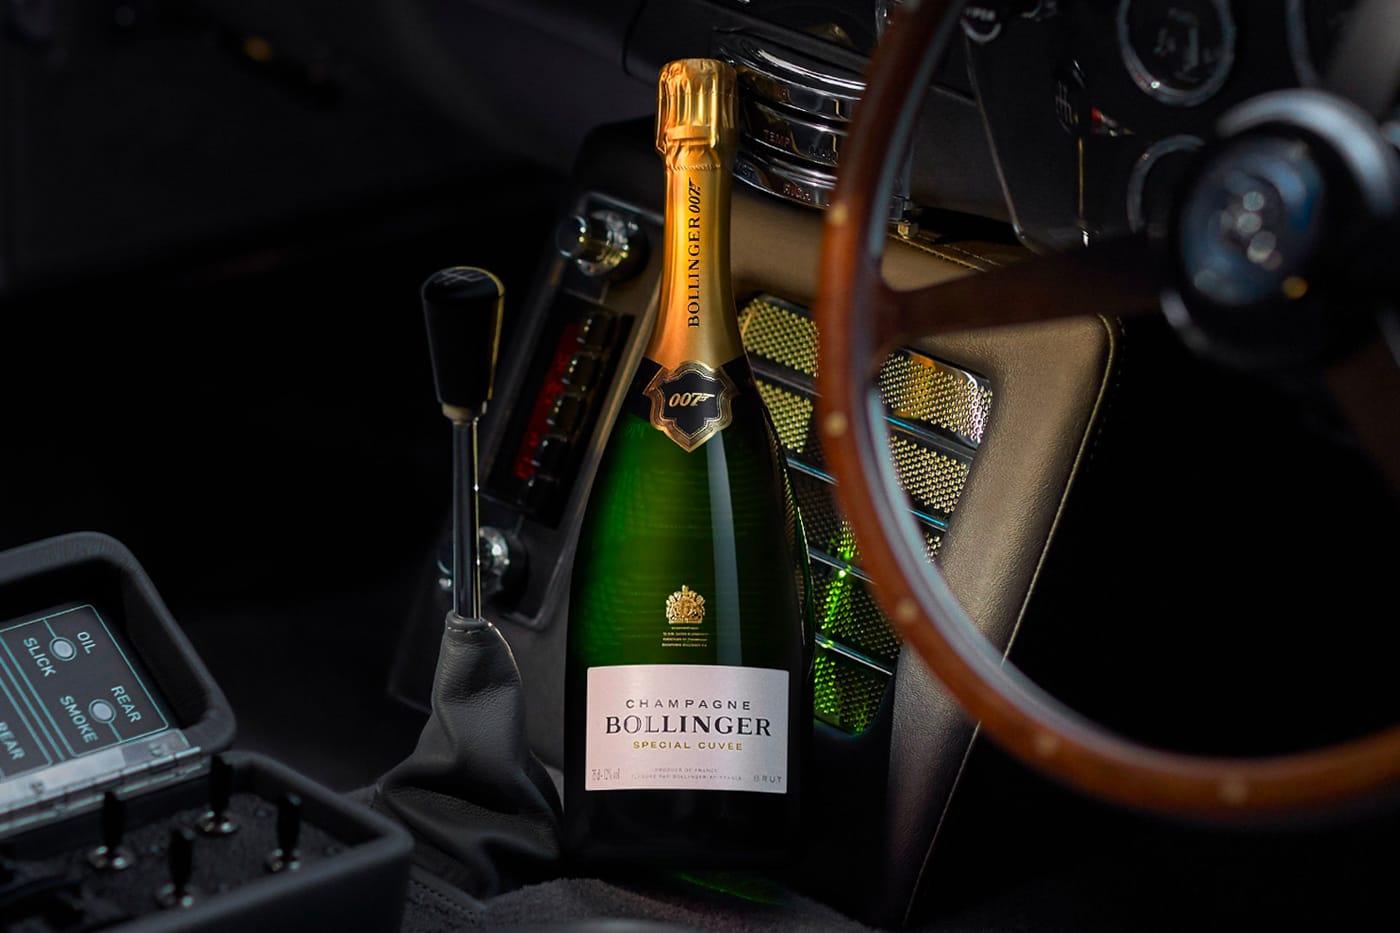 No Time To Die Champagne Bollinger Special Cuvee 007 Release